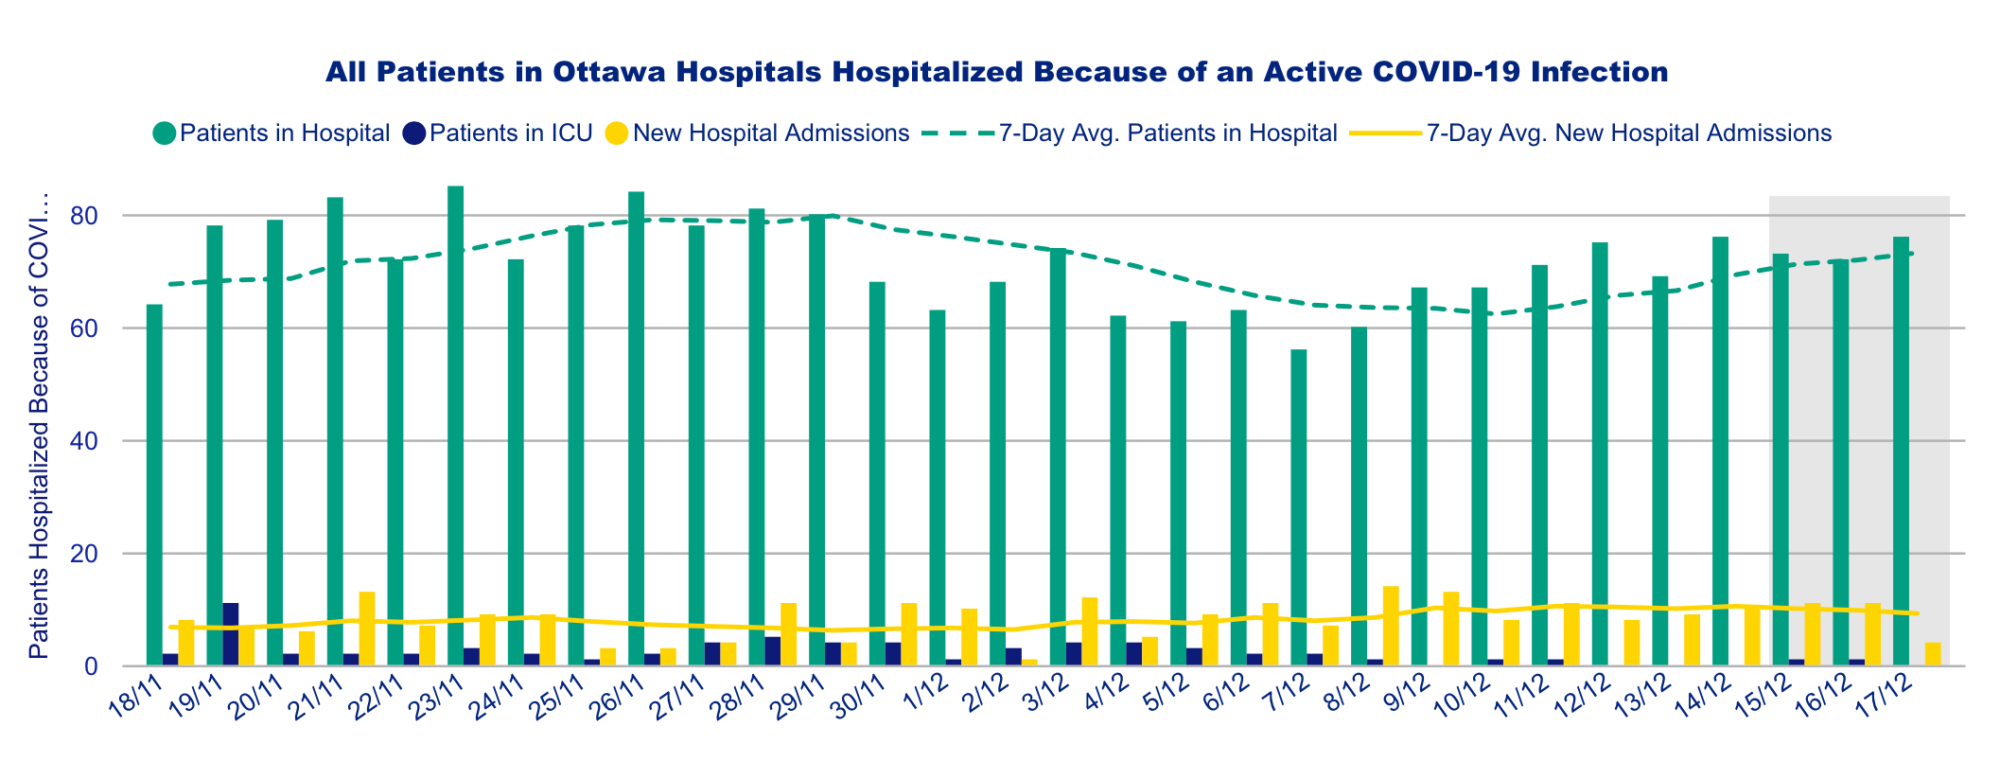 Chart of all patients in Ottawa hospitals hospitalized because of an active COVID-19 infection.